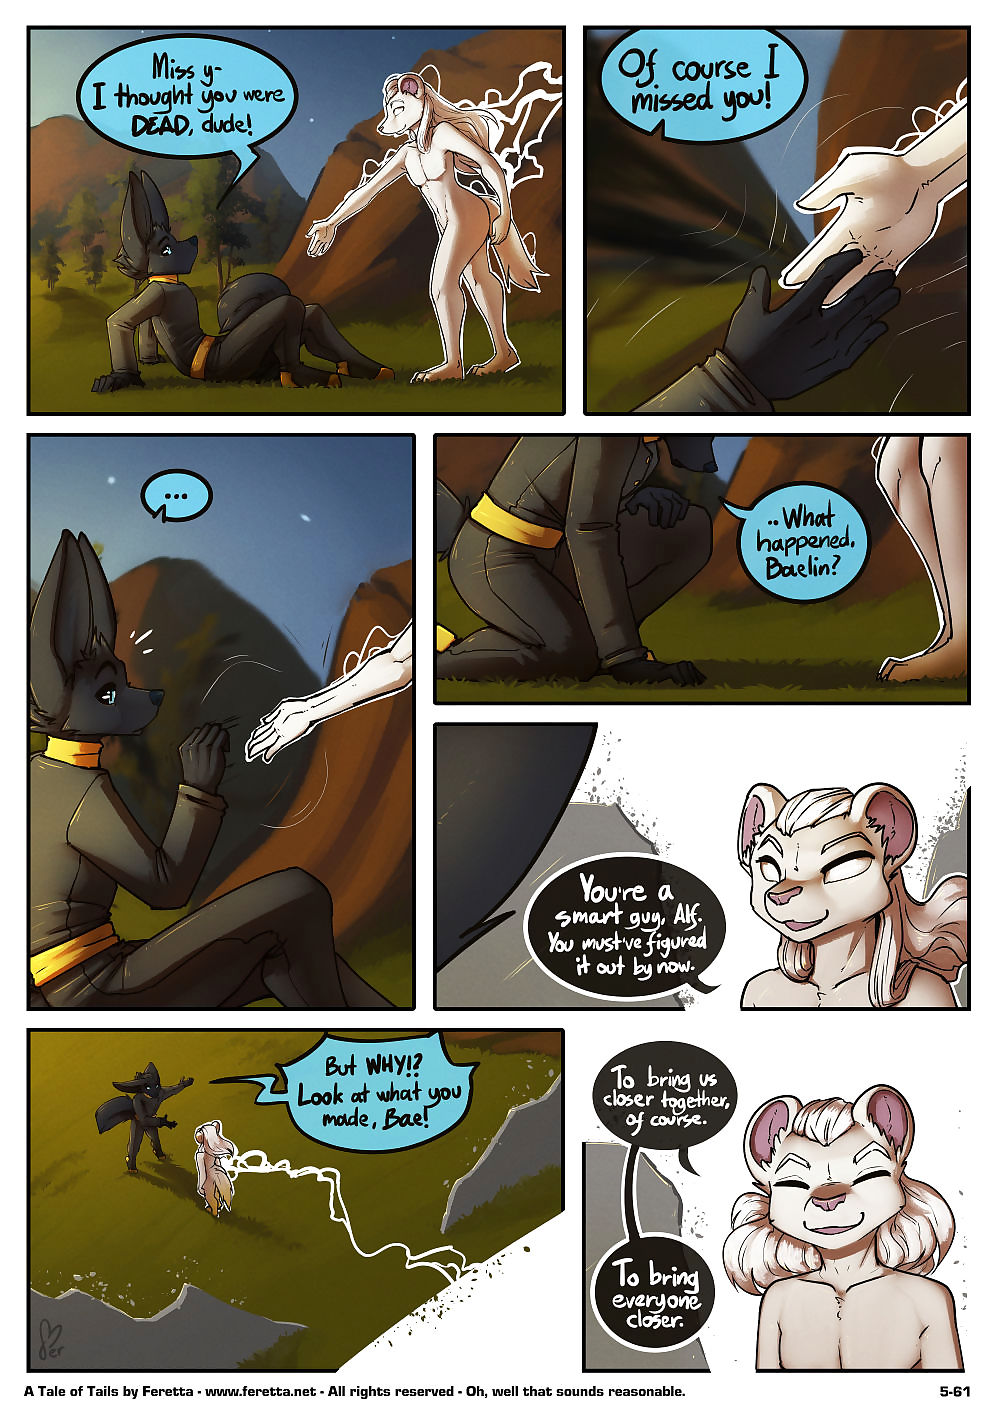 A Tale of Tails: Chapter 5 - A World of Hurt - part 4